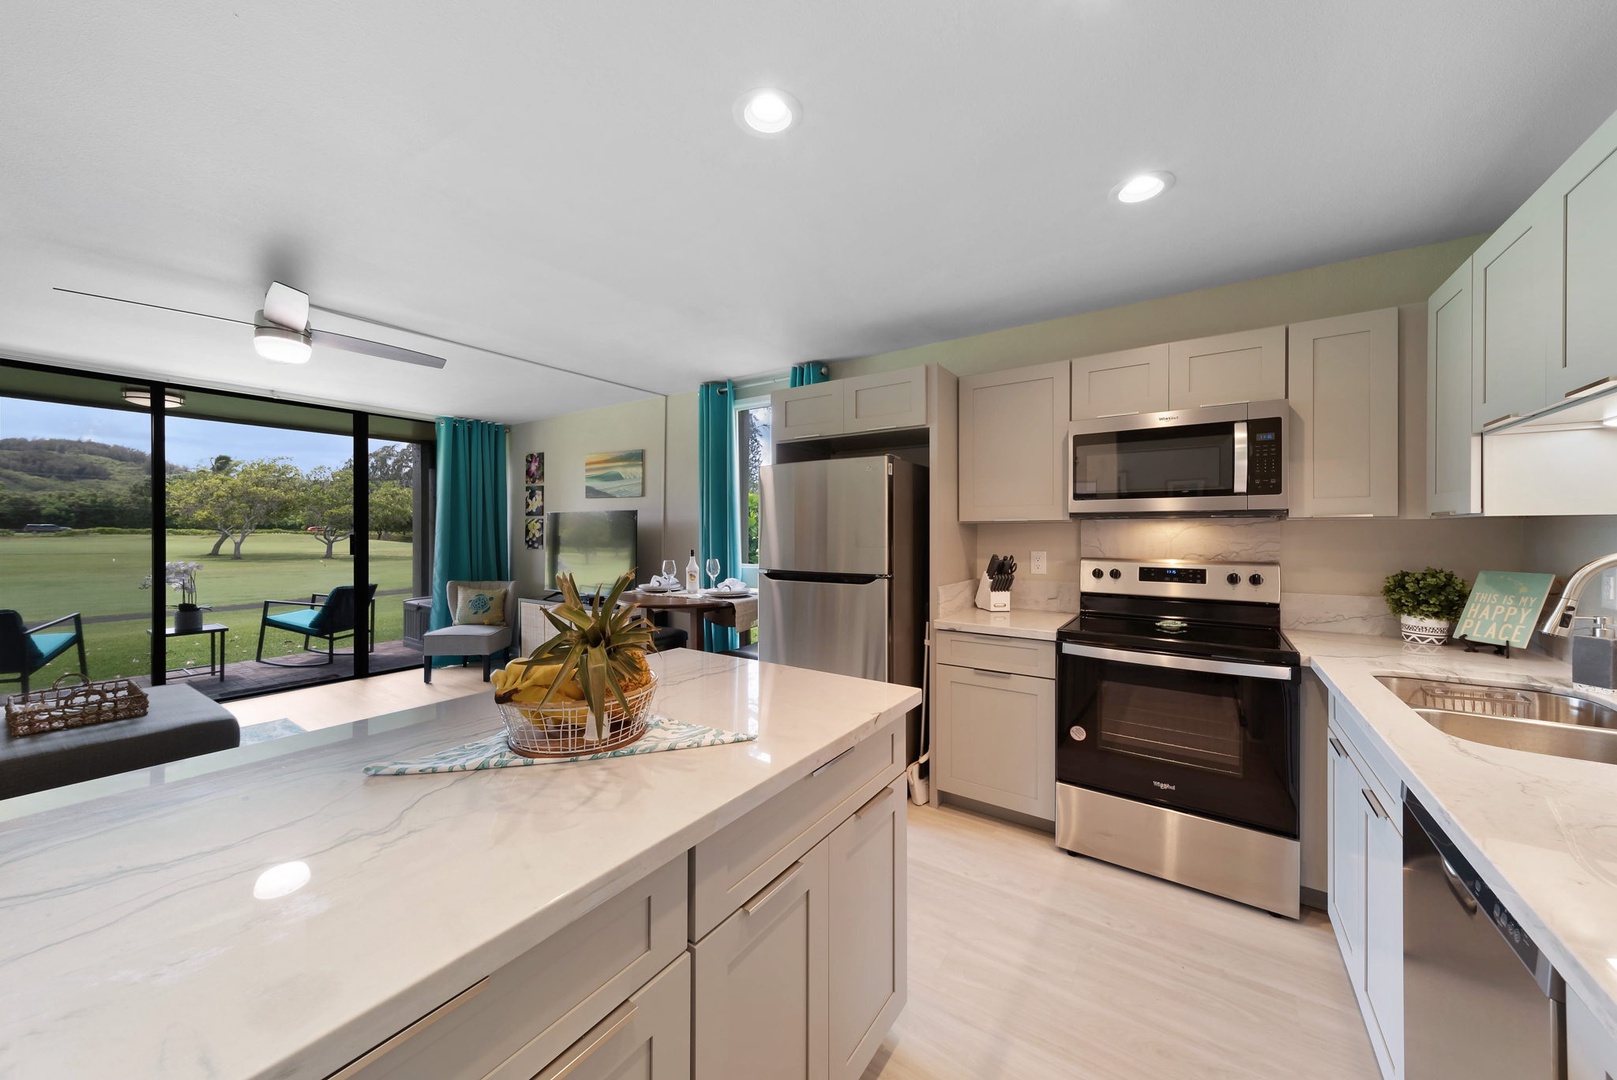 Kahuku Vacation Rentals, Turtle Bay's Kuilima Estates West #104 - Beautifully and brightly remodeled kitchen